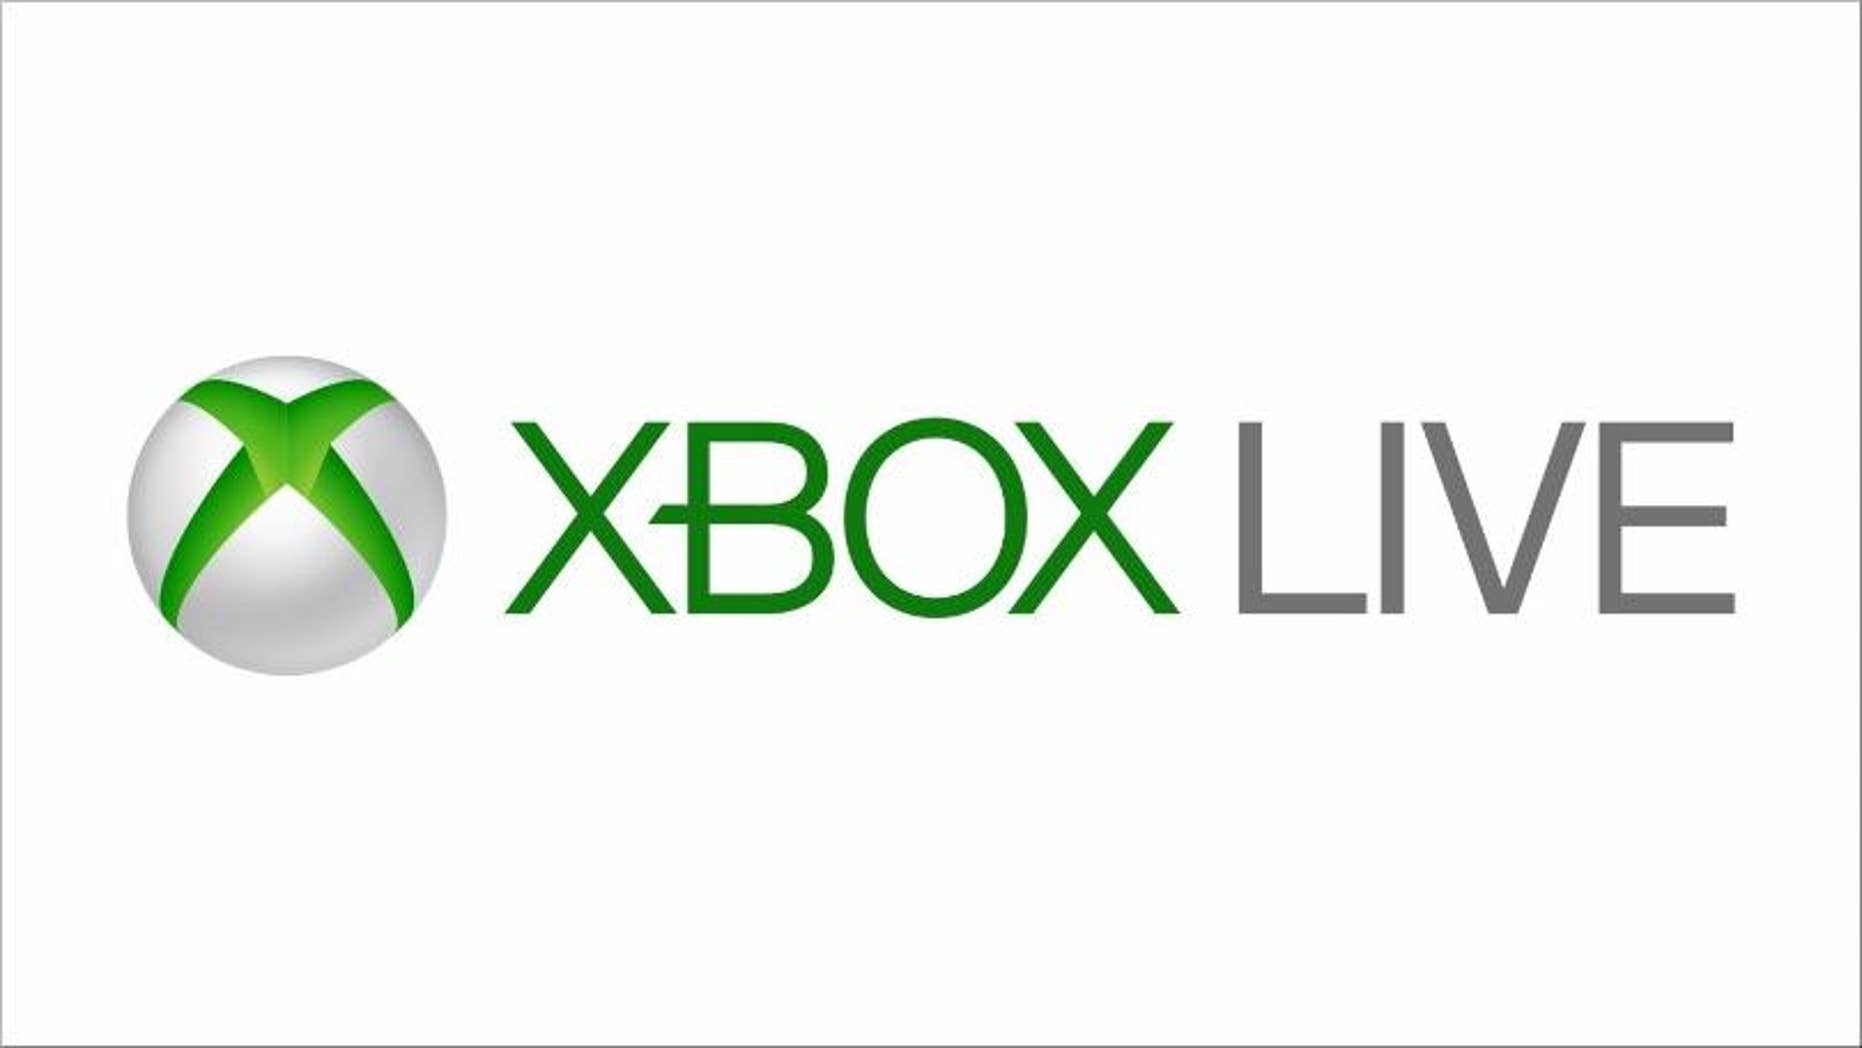 Xbox Live to connect with Android, iOS, Nintendo Switch players